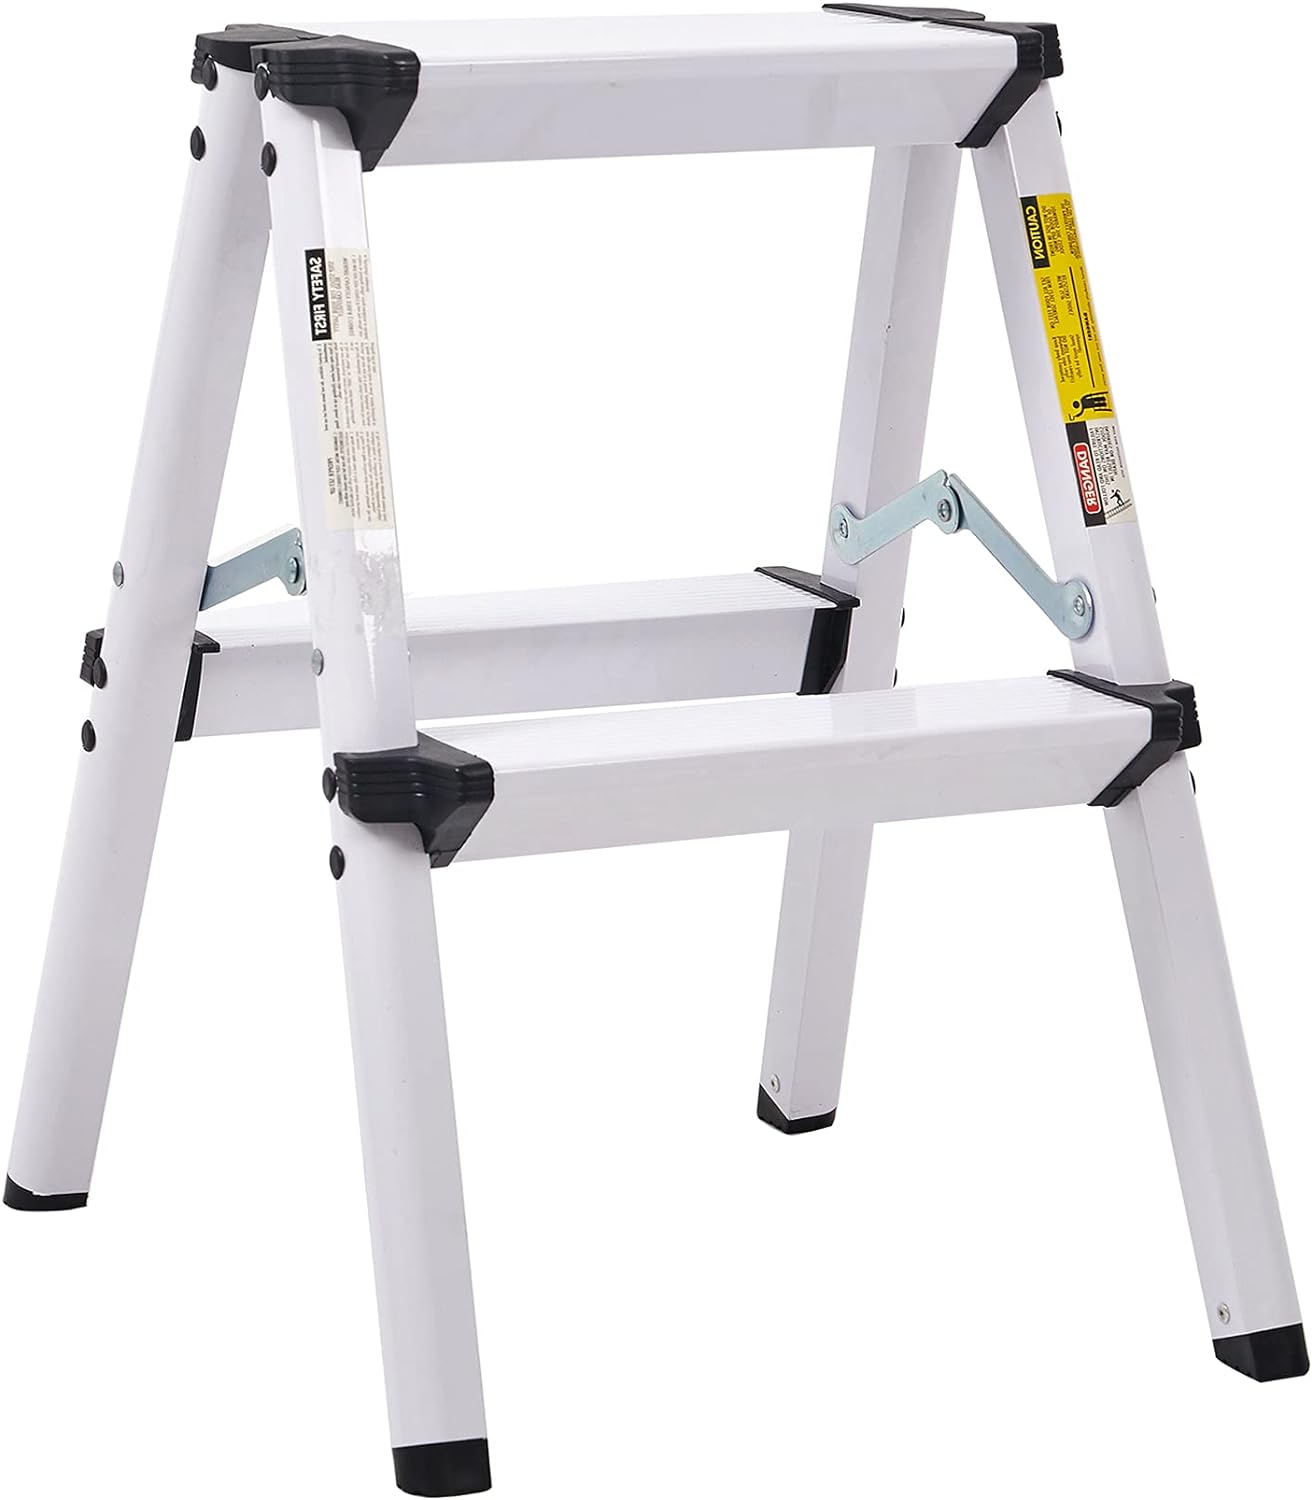 Aluminum 2-Step Stool Folding Double Sided Step Ladder Anti-Slip Sturdy and Wide Pedal Ladder 250 lbs Capacity